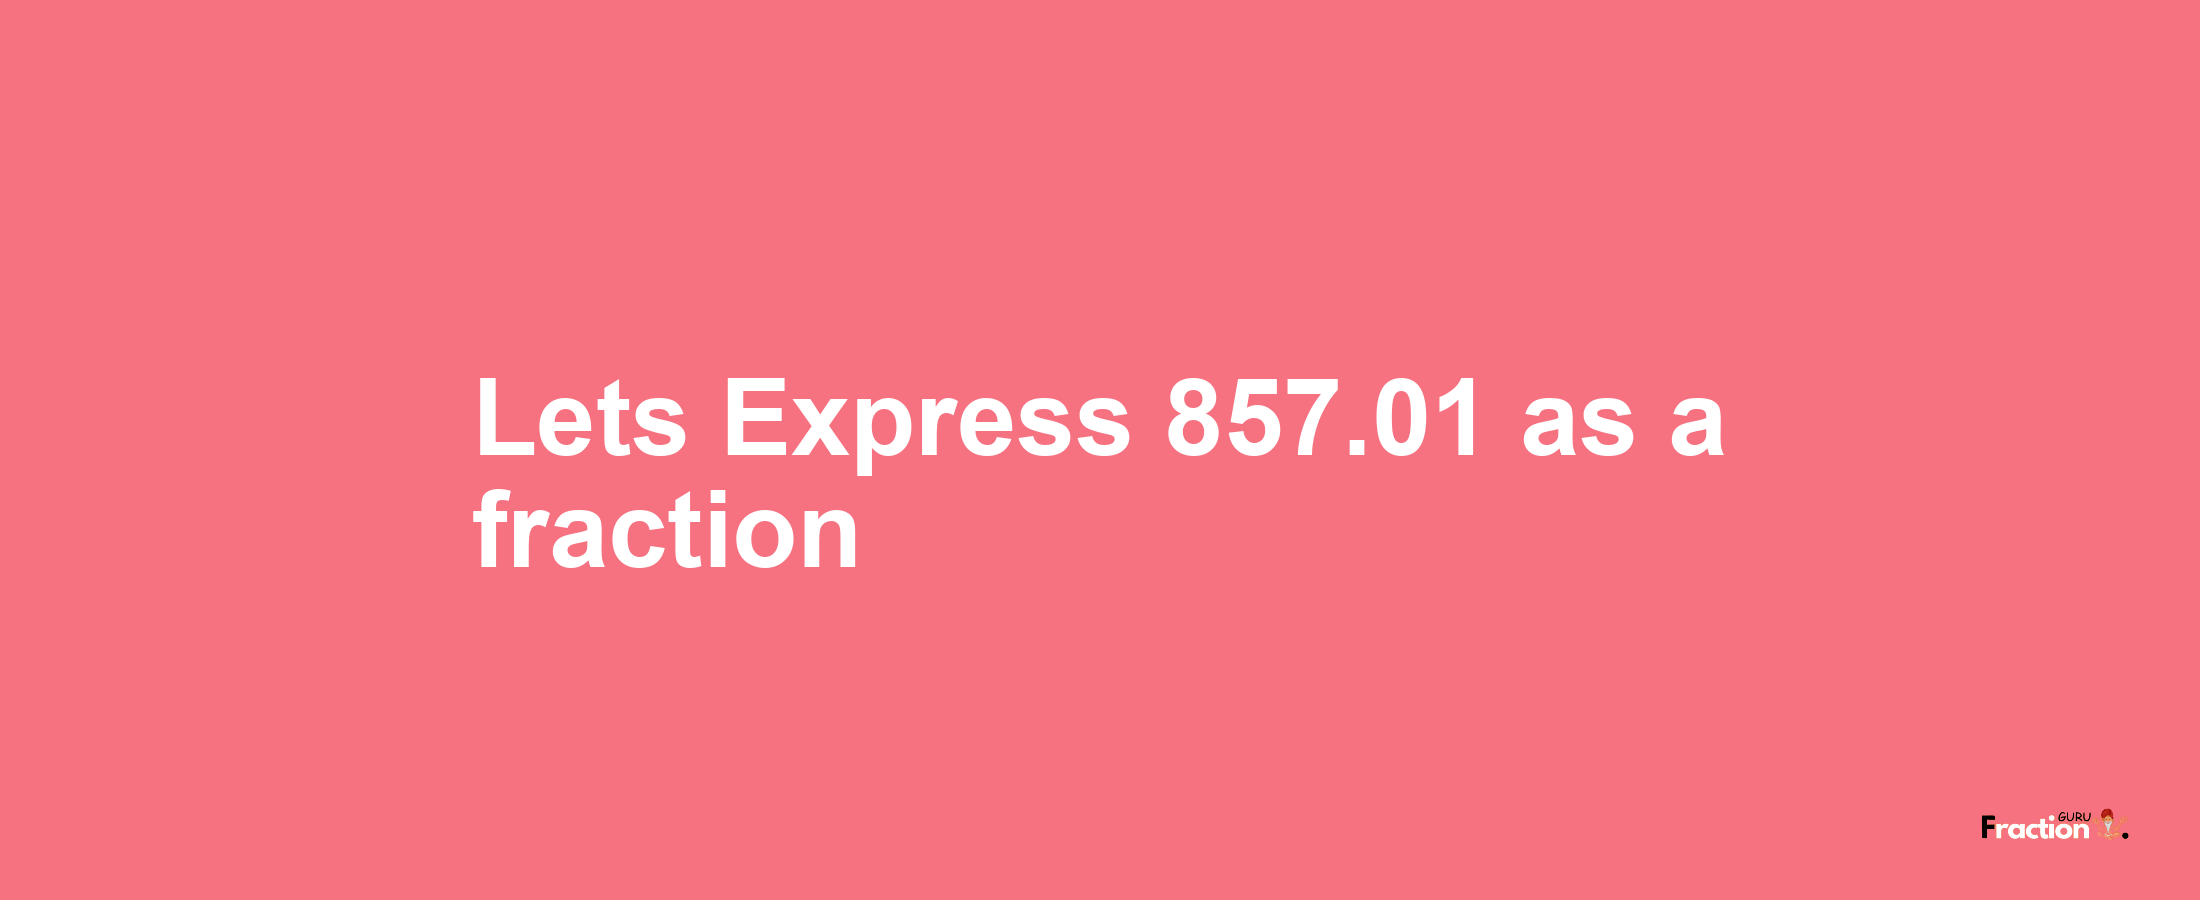 Lets Express 857.01 as afraction